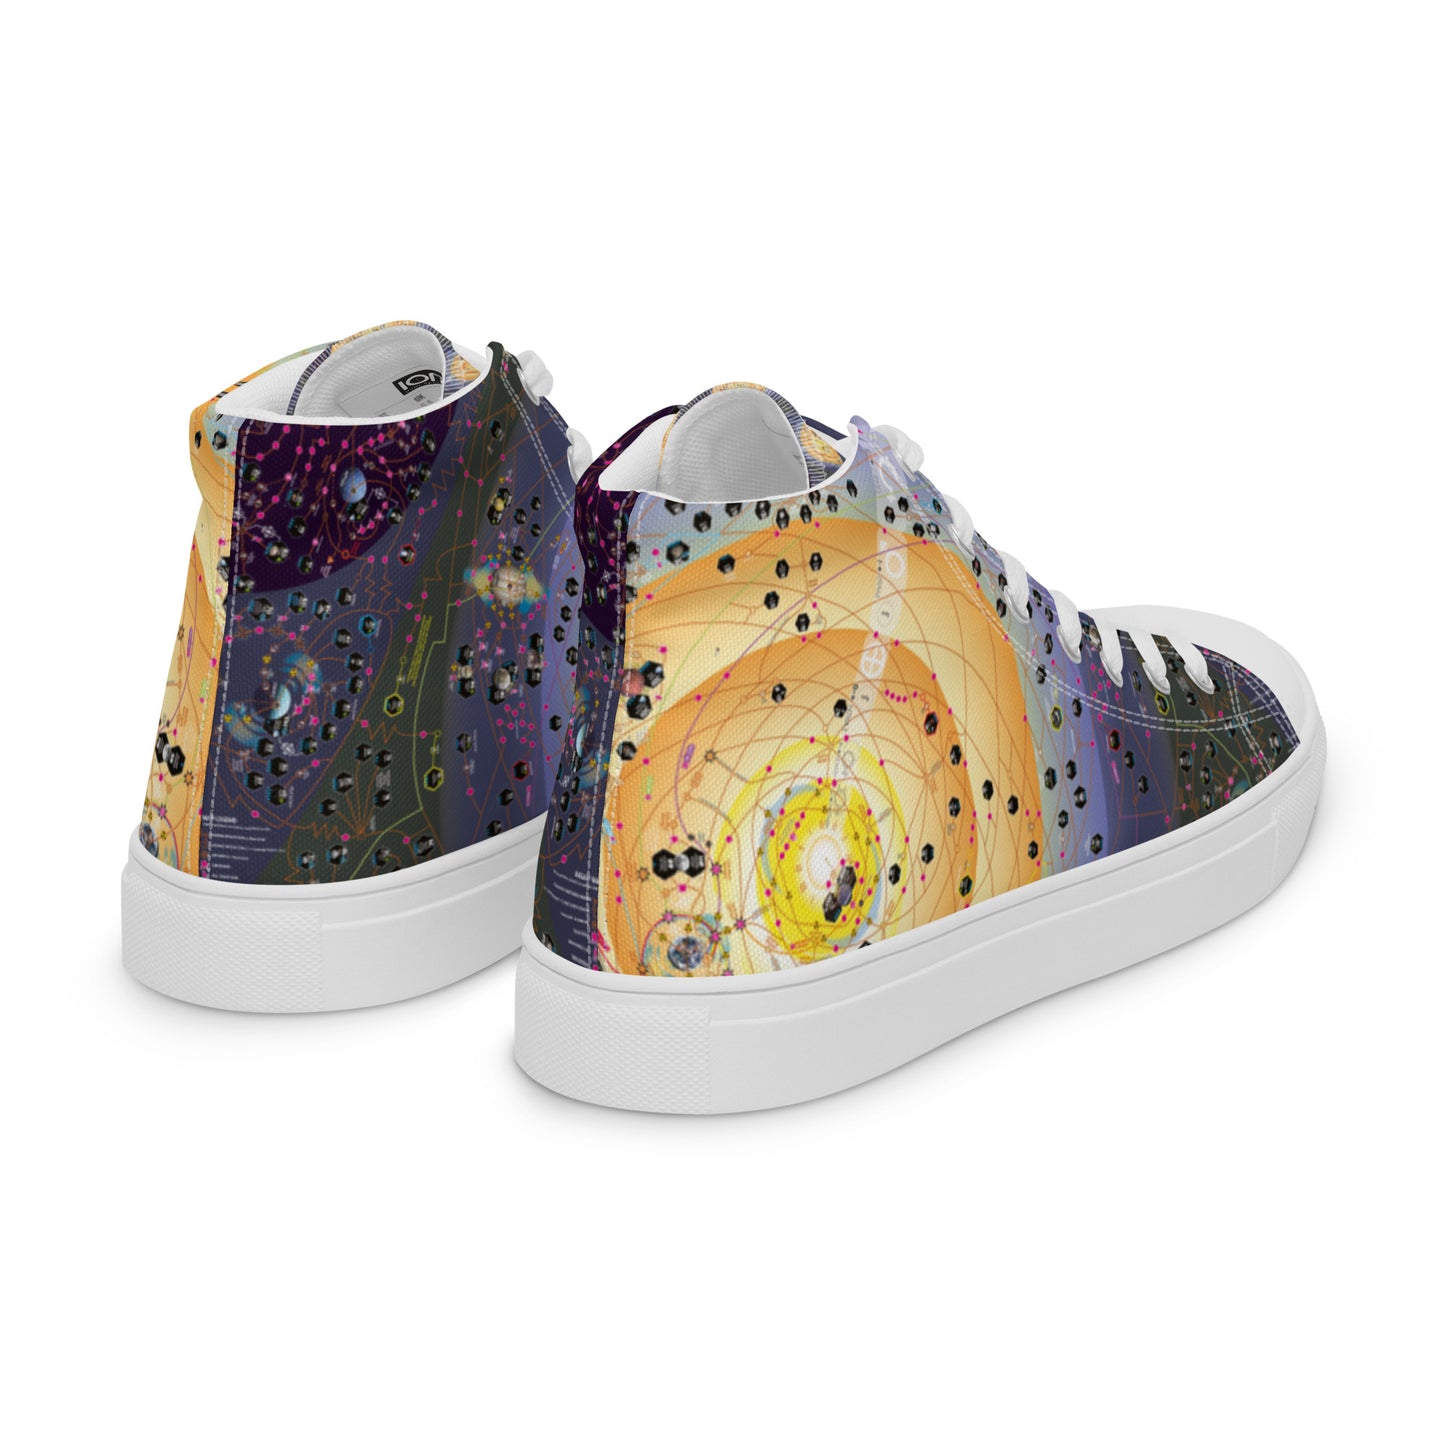 HIGH FRONTIER 4 ALL Sun Map: Men’s high top canvas shoes - back angled view of shoes